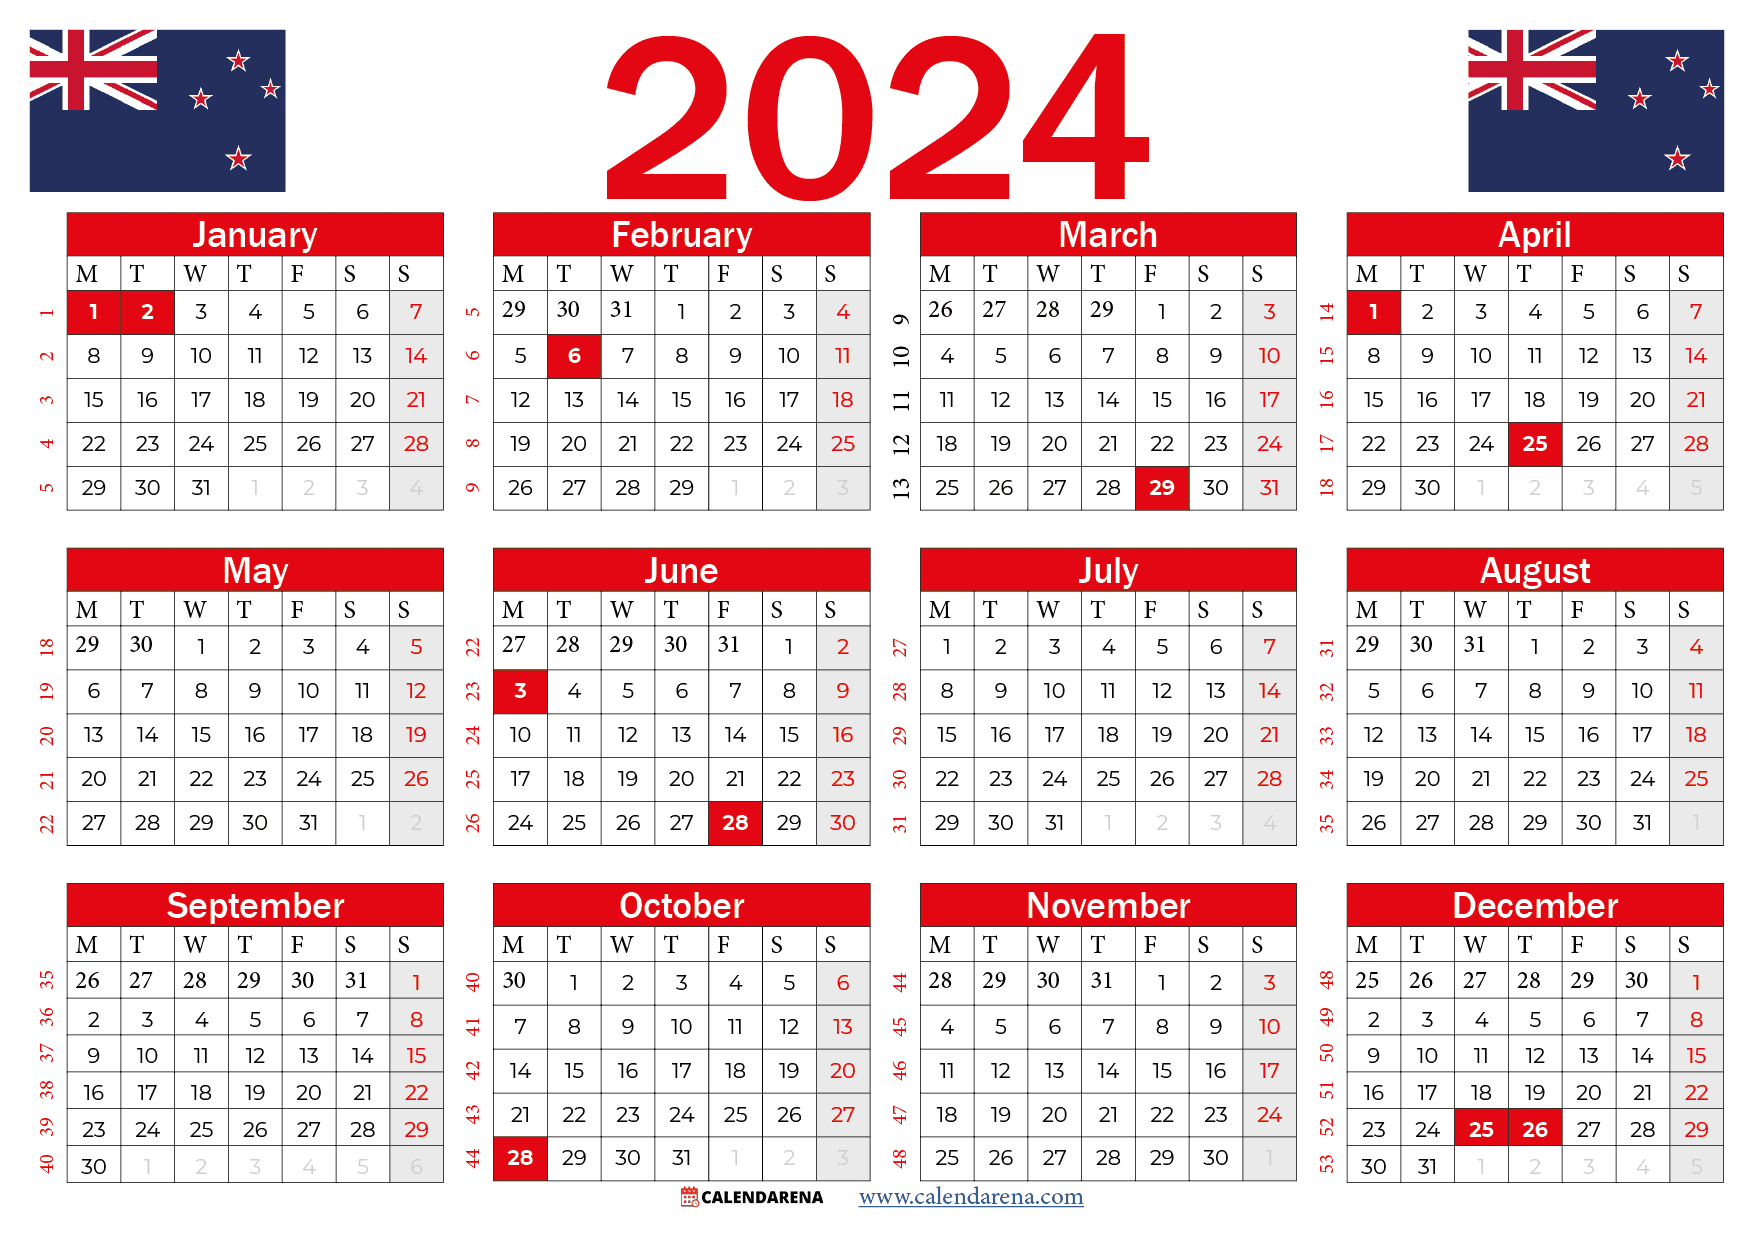 New Zealand 2023 Calendar With Holidays Printable pertaining to Free Printable Calendar 2024 Nz With Public Holidays